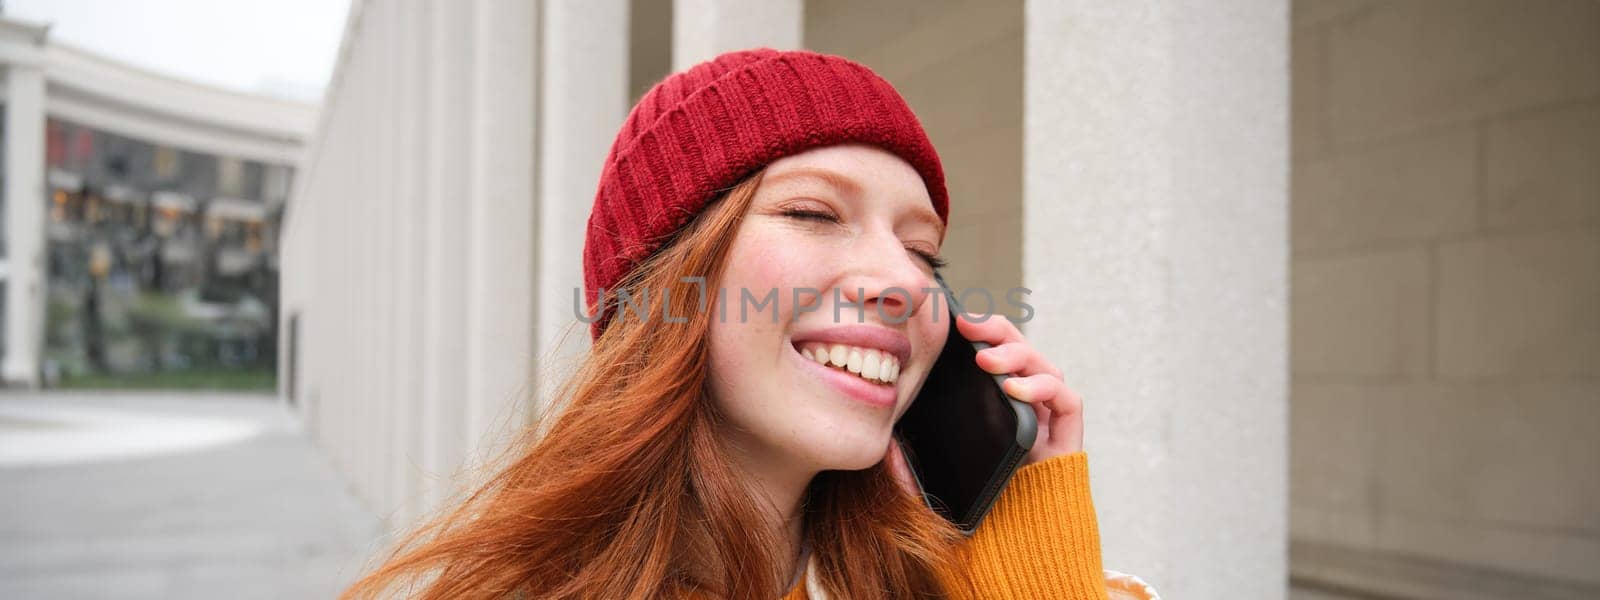 Mobile broadband and people. Smiling young redhead woman walks in town and talks on mobile phone, calling friend on smartphone, using internet to make a call abroad.